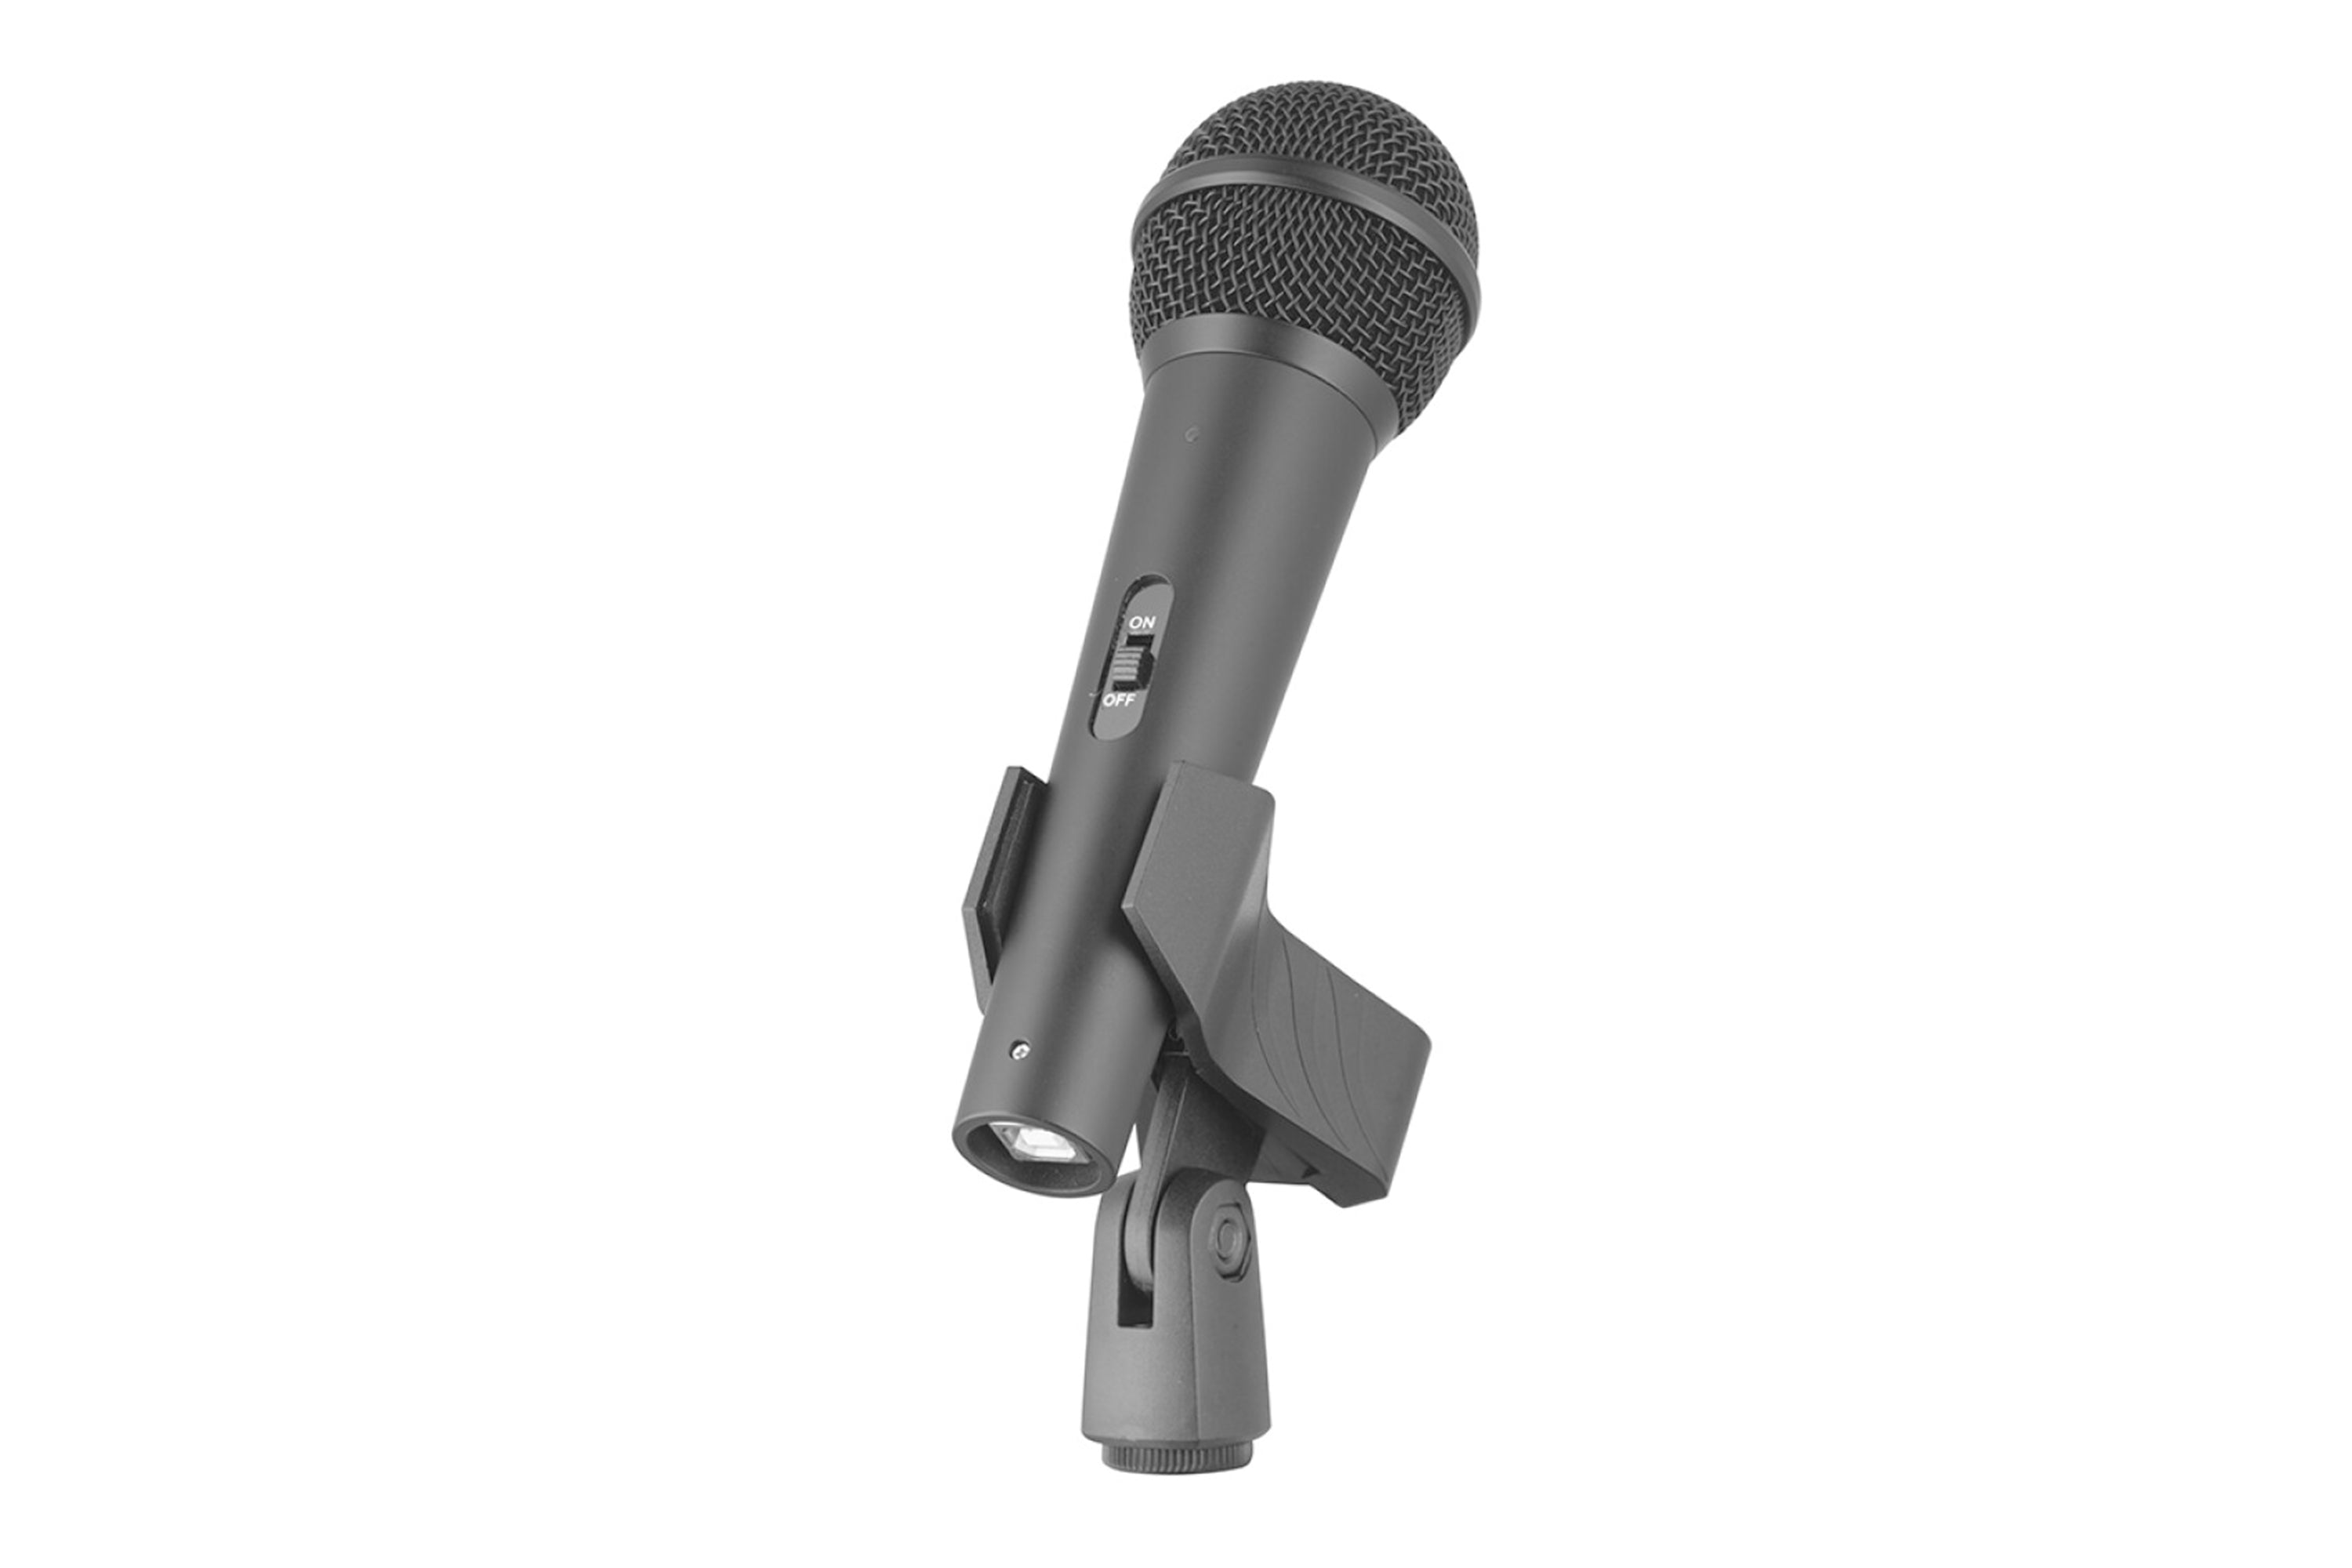 Stagg SUM20 USB Microphone Set